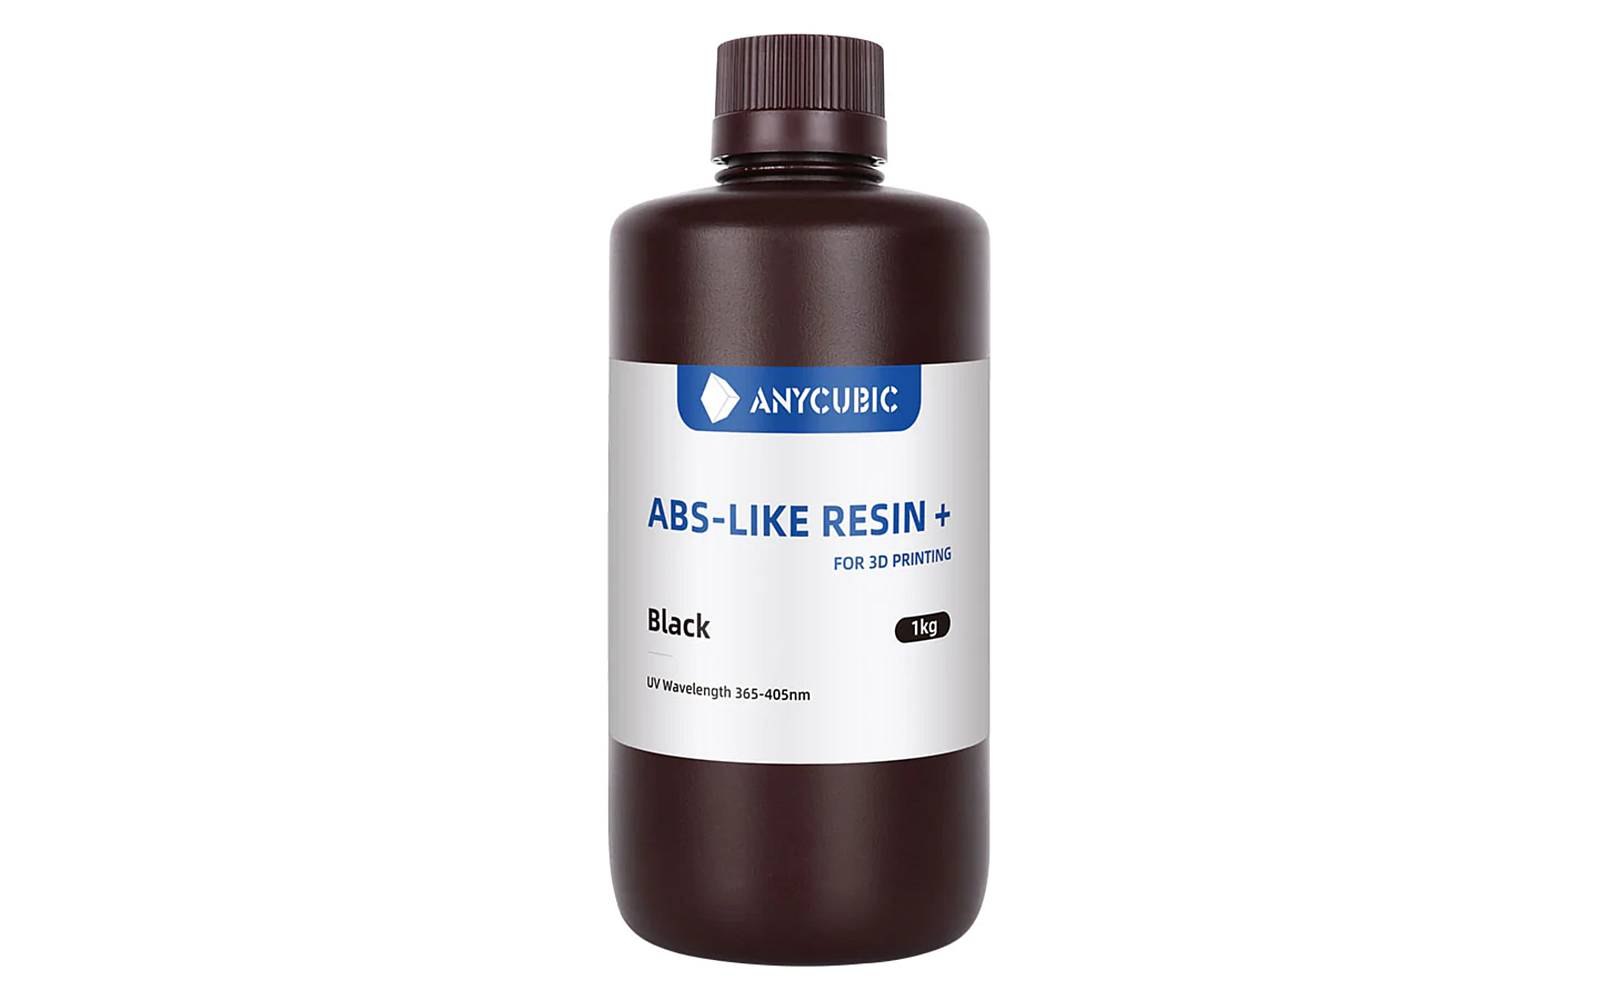 Anycubic ABS-Like Resin+ Black